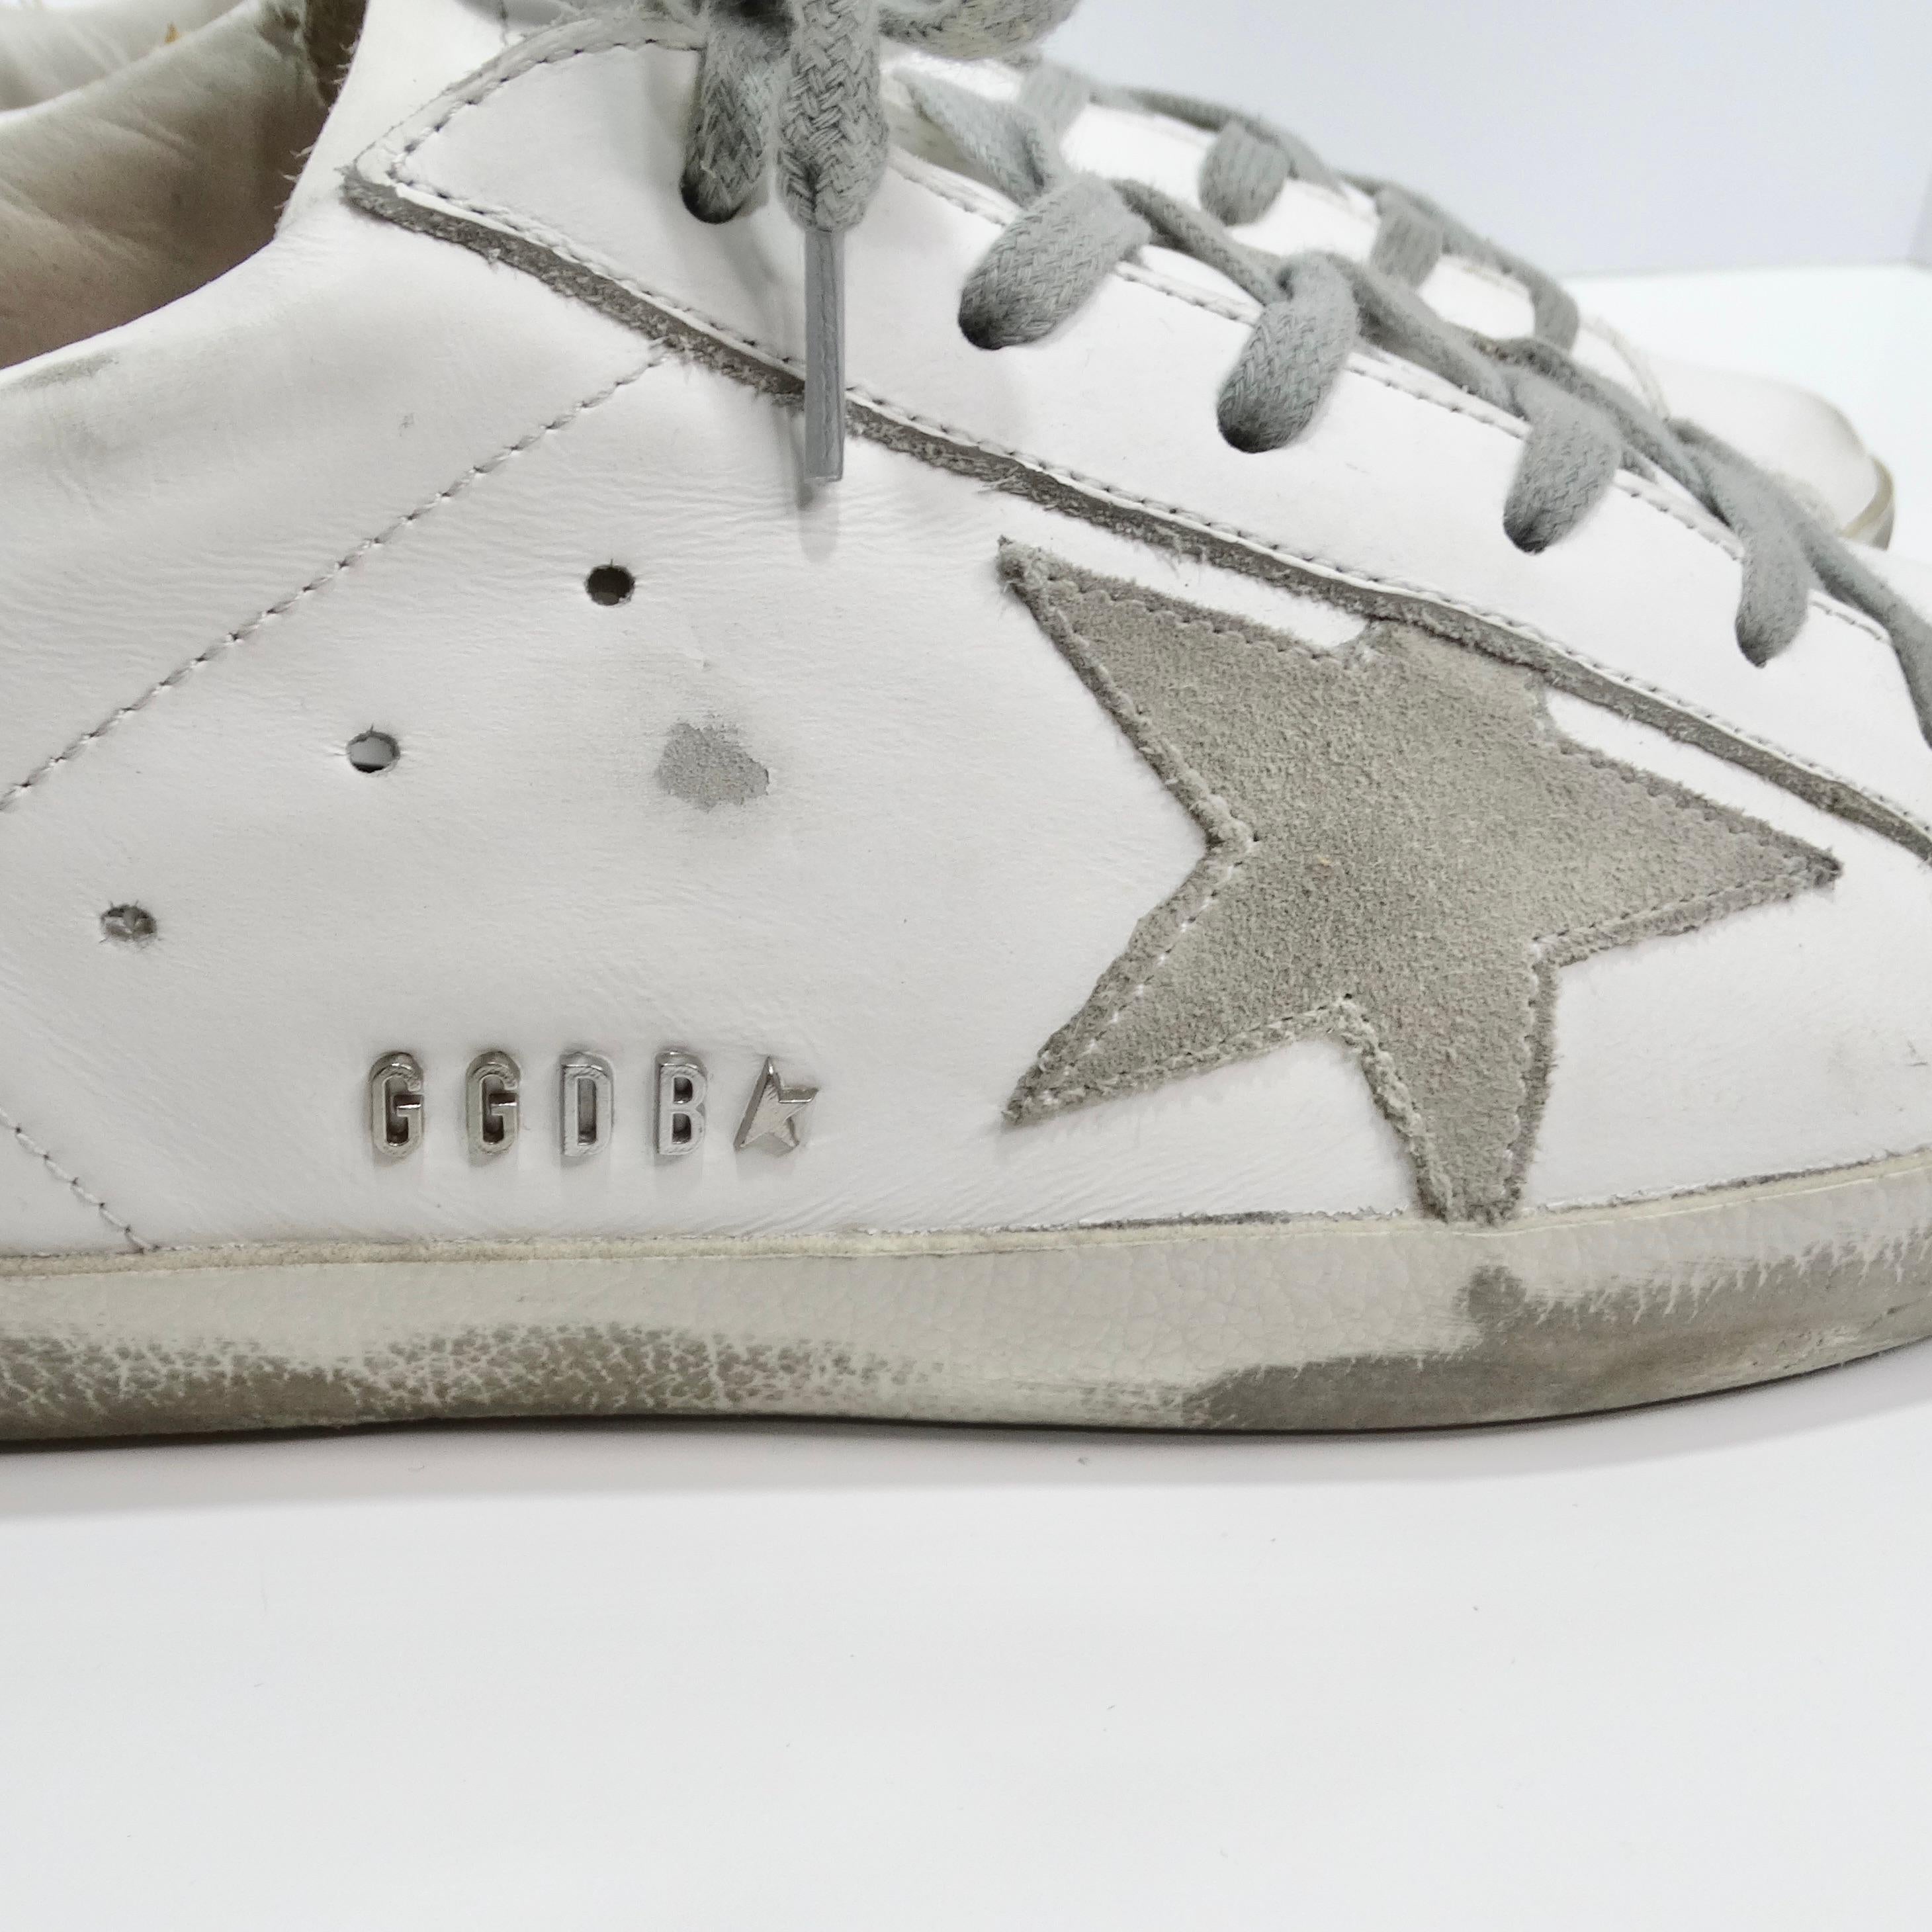 Golden Goose White Leather Super Star Sneakers In Excellent Condition For Sale In Scottsdale, AZ